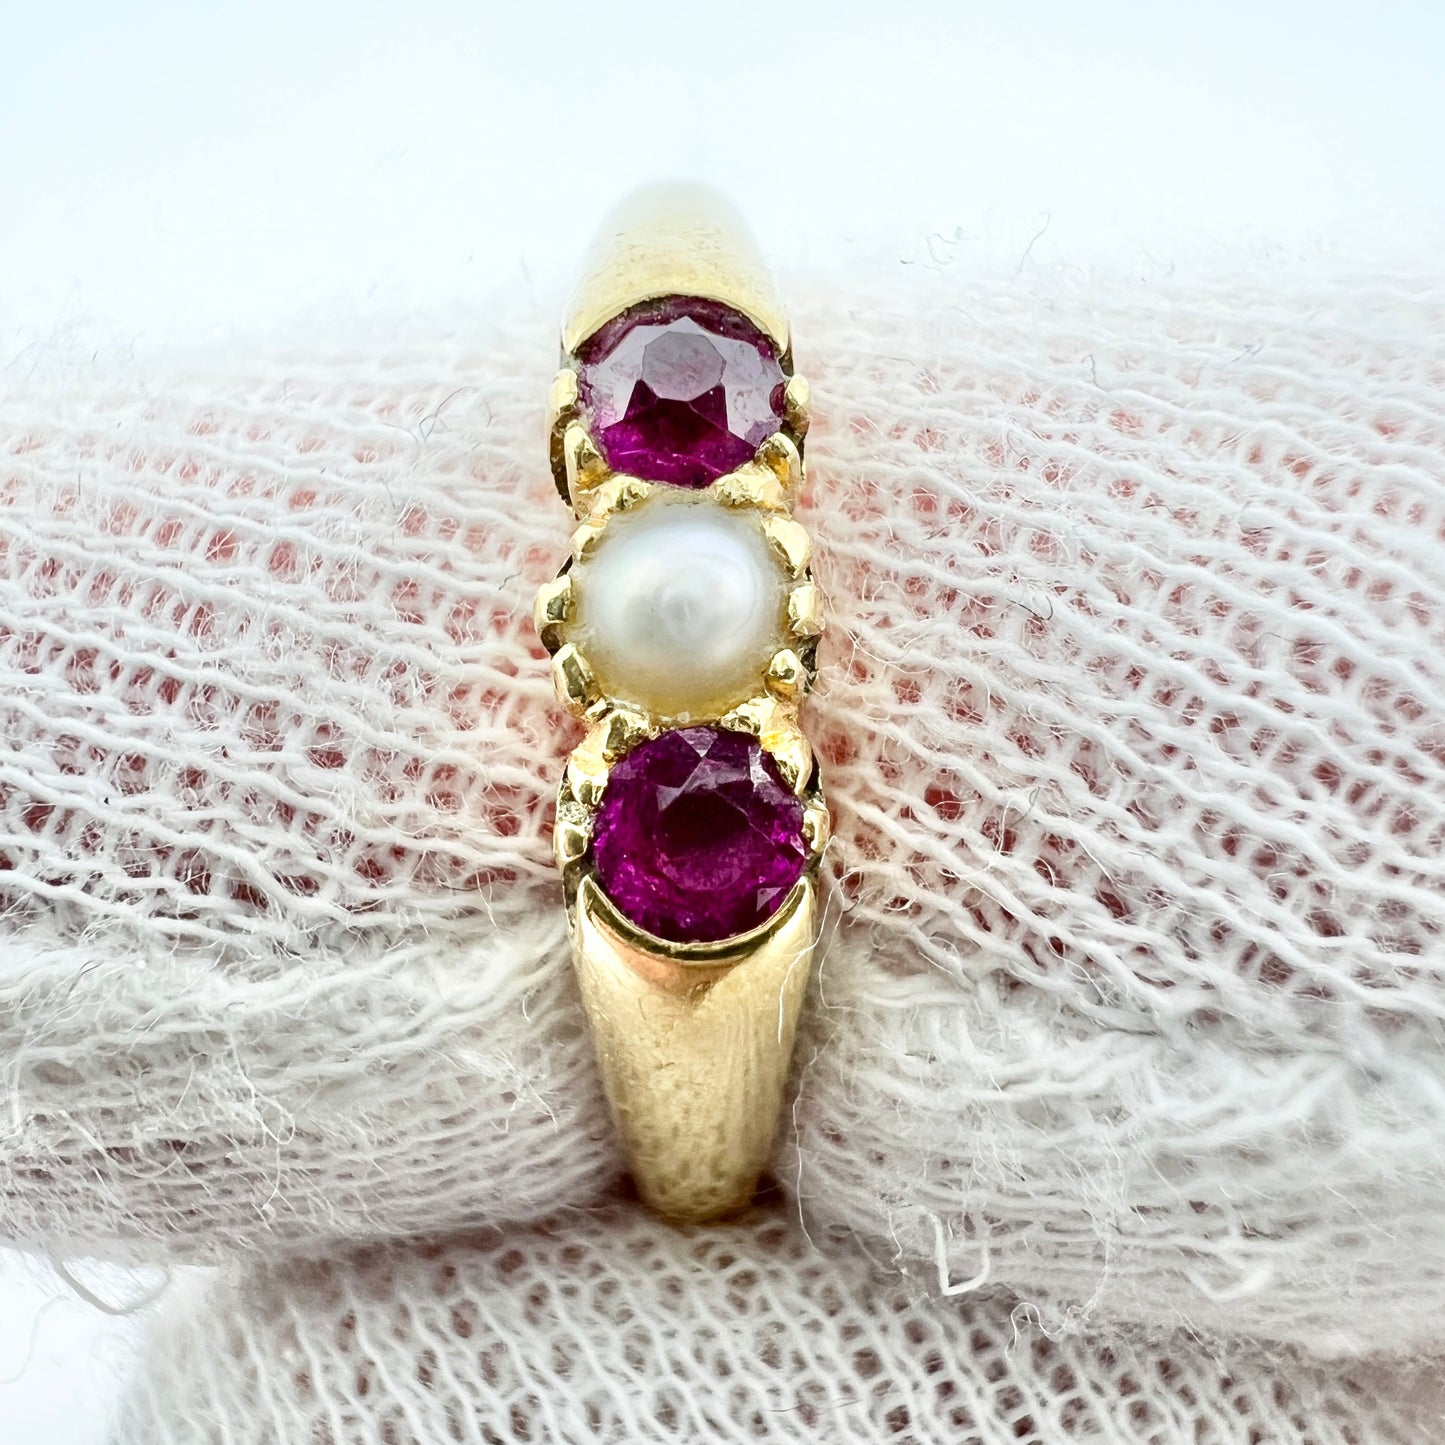 Sweden c 1950s Vintage 18k Gold Synthetic Sapphire Cultured Pearl Ring.